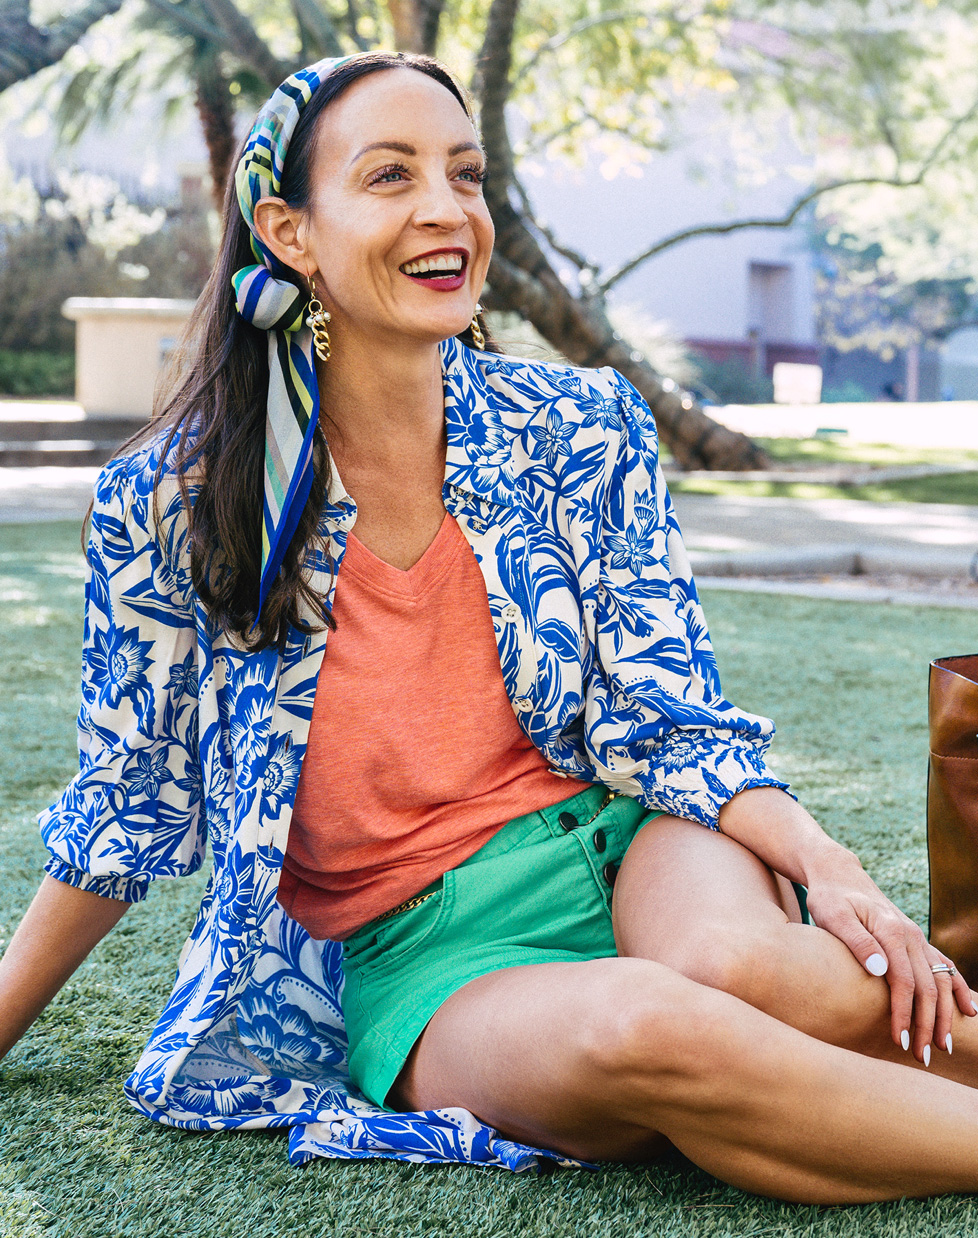 cabi Stylist wearing Serenity Tee in Cantaloupe, Button Fly Short in Waterfall, Athena Dress in Athena Tropical, Baseline Scarf in Circus Stripe, and Wisdom Earrings in Gold.